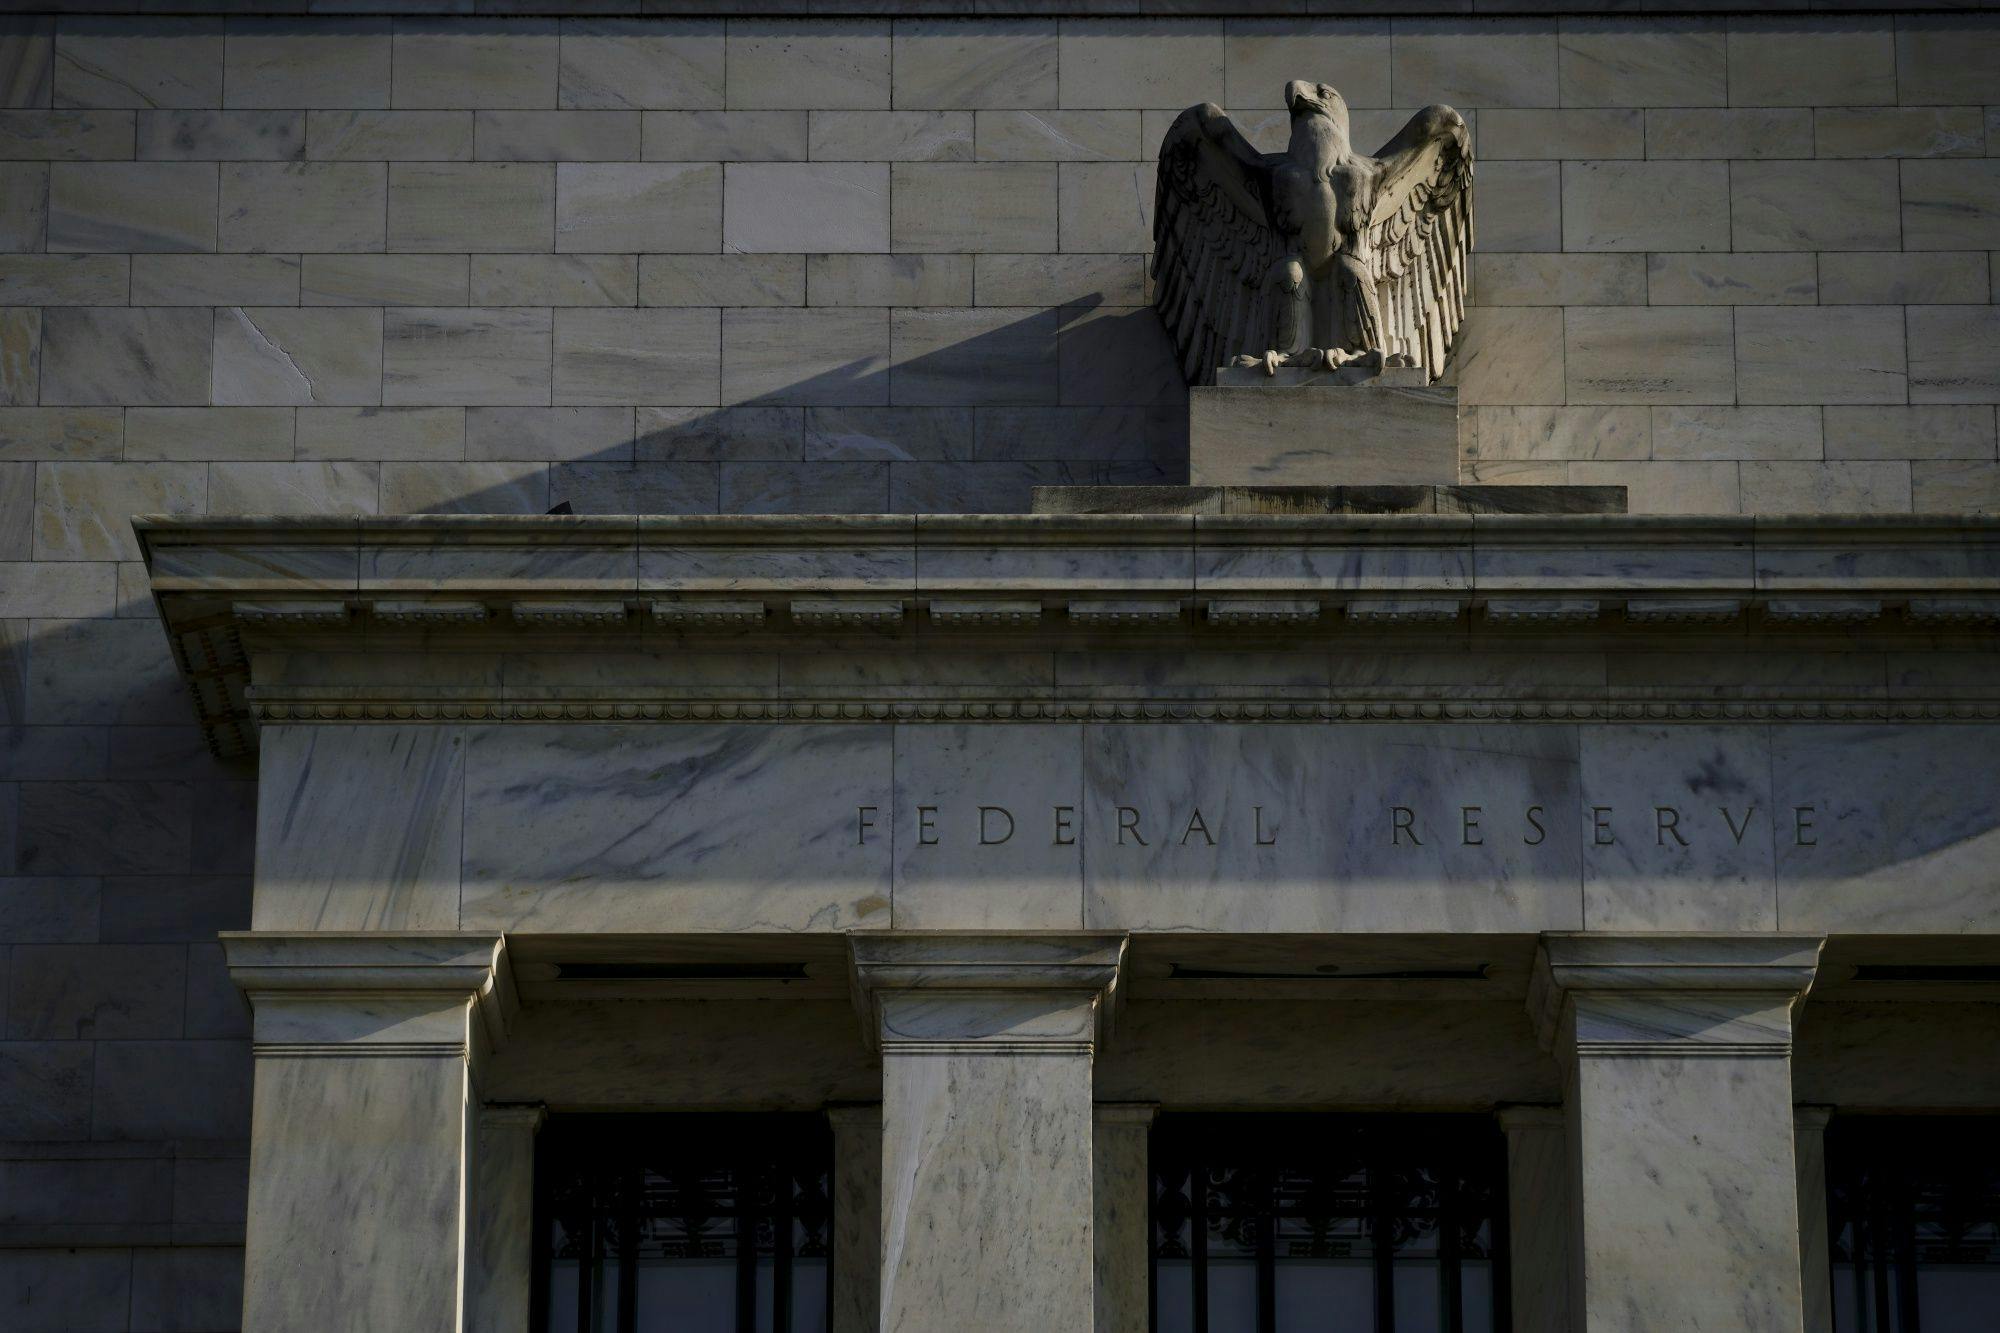 Entrance to the U.S. Federal Reserve building